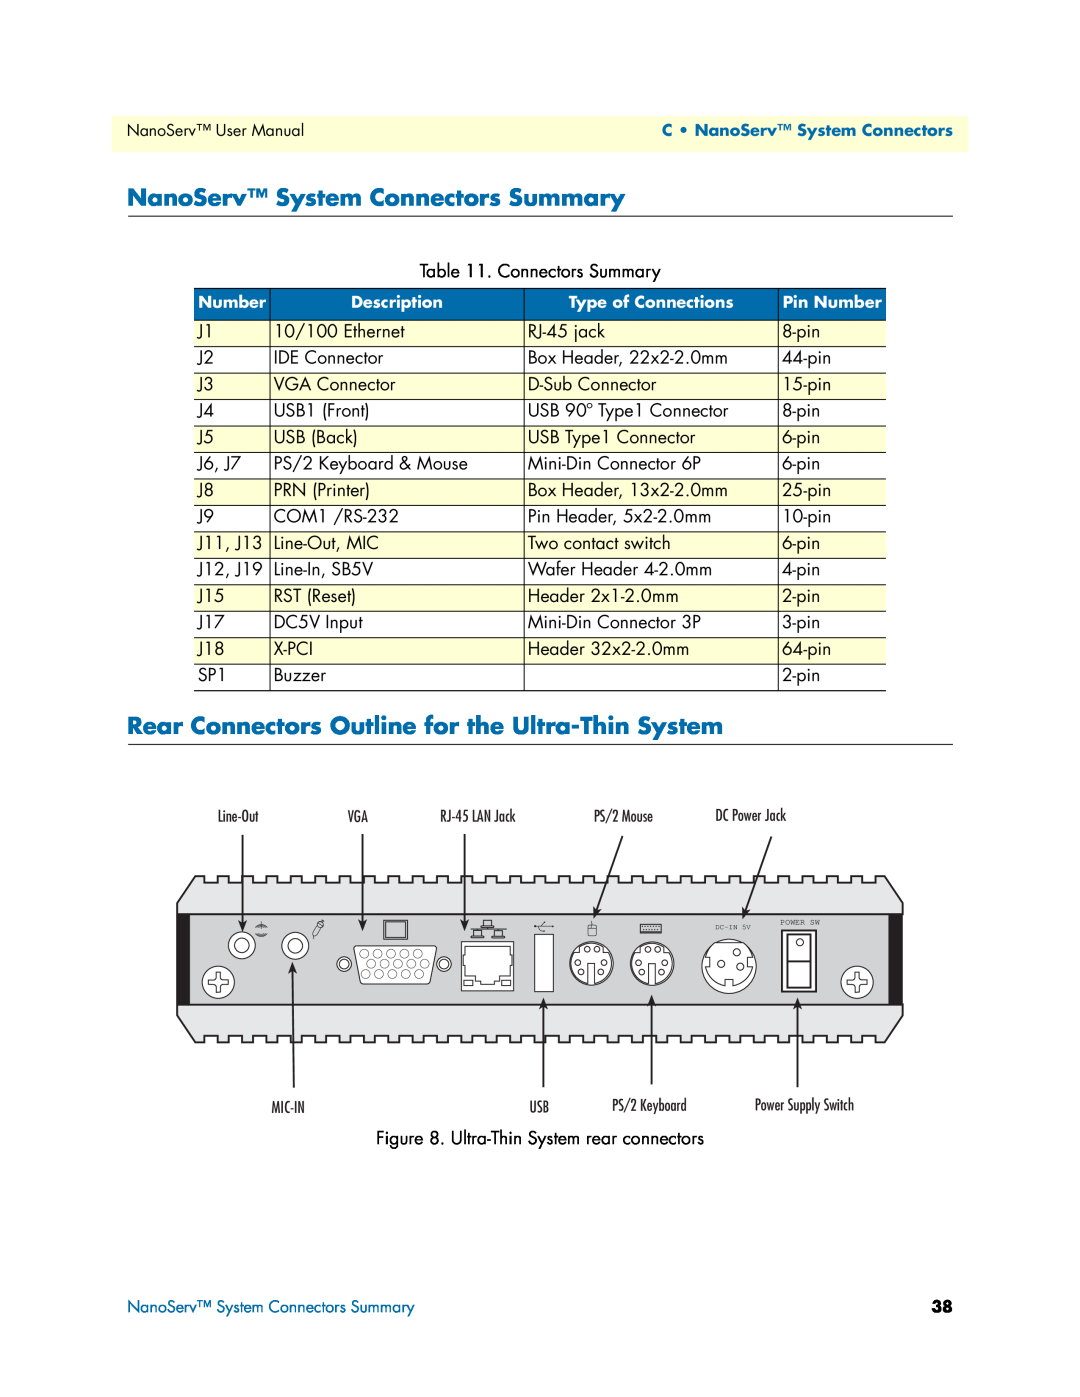 Patton electronic 07M6070-UM NanoServ System Connectors Summary, Rear Connectors Outline for the Ultra-Thin System 